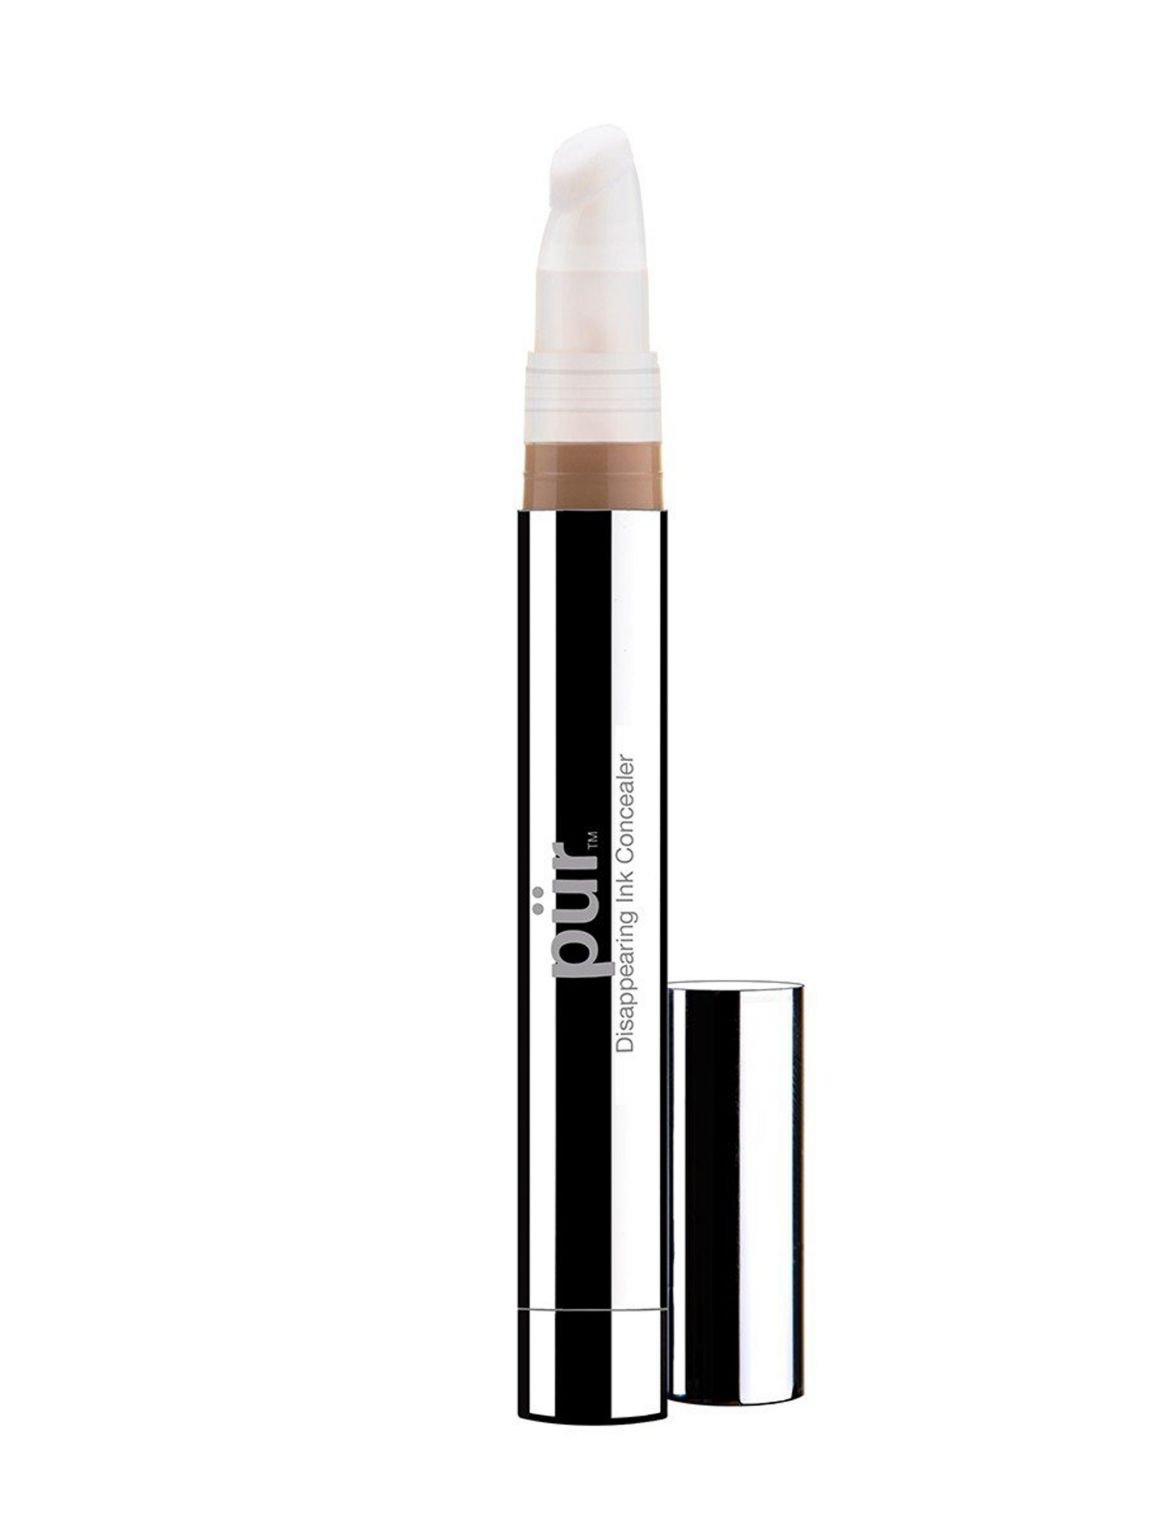 Disappearing Act 4-in-1 Concealer 2.8g brown